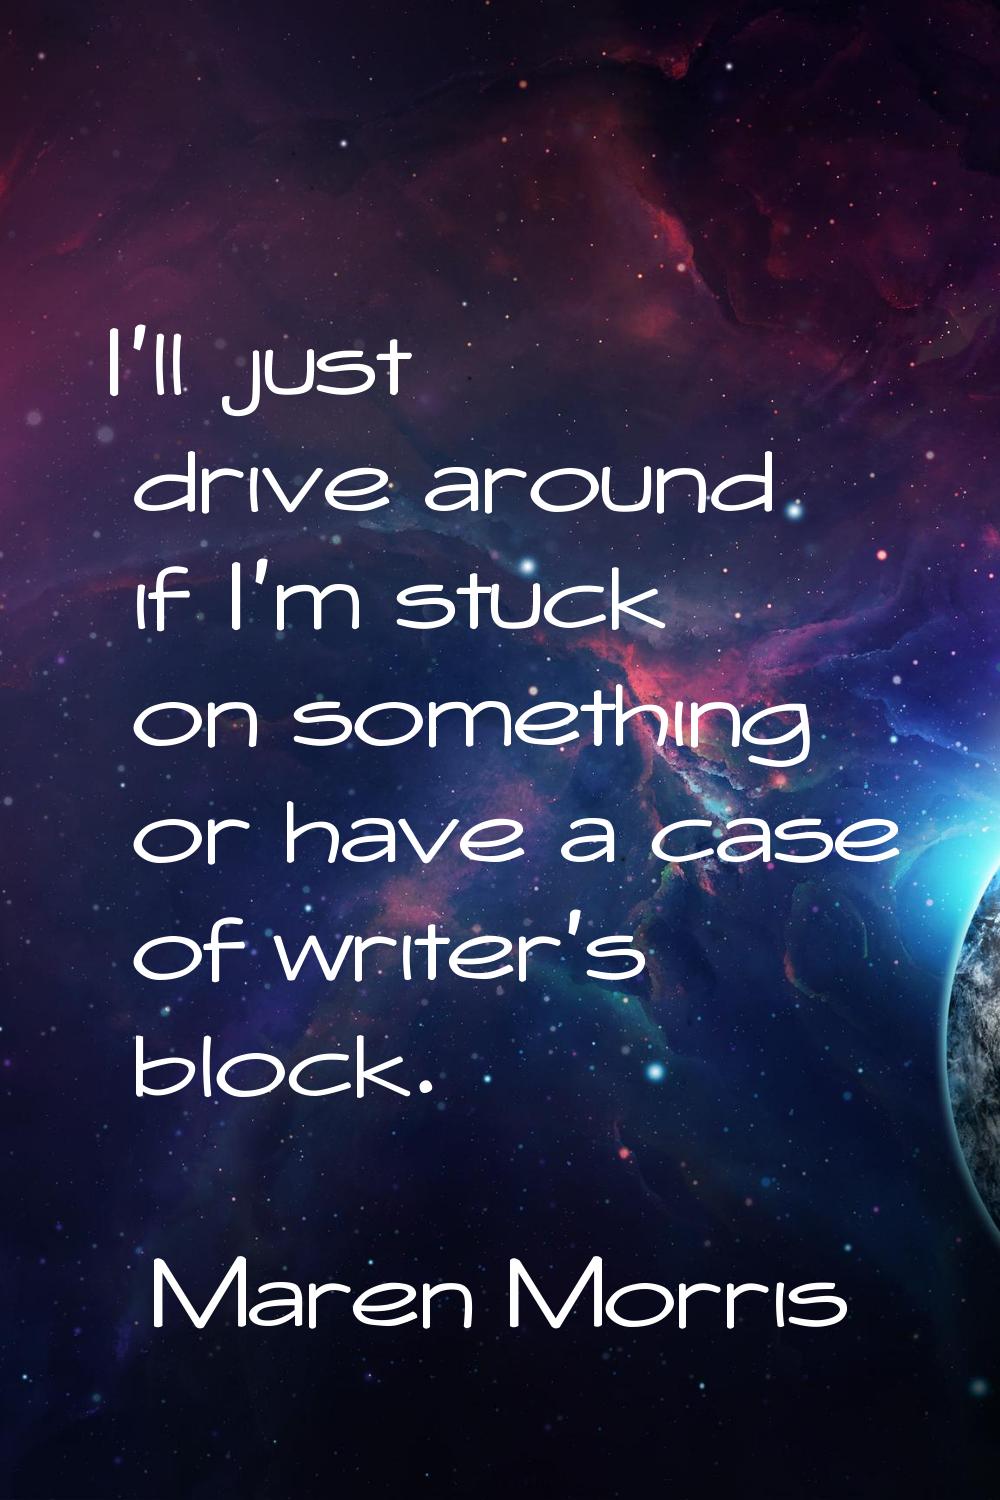 I'll just drive around if I'm stuck on something or have a case of writer's block.